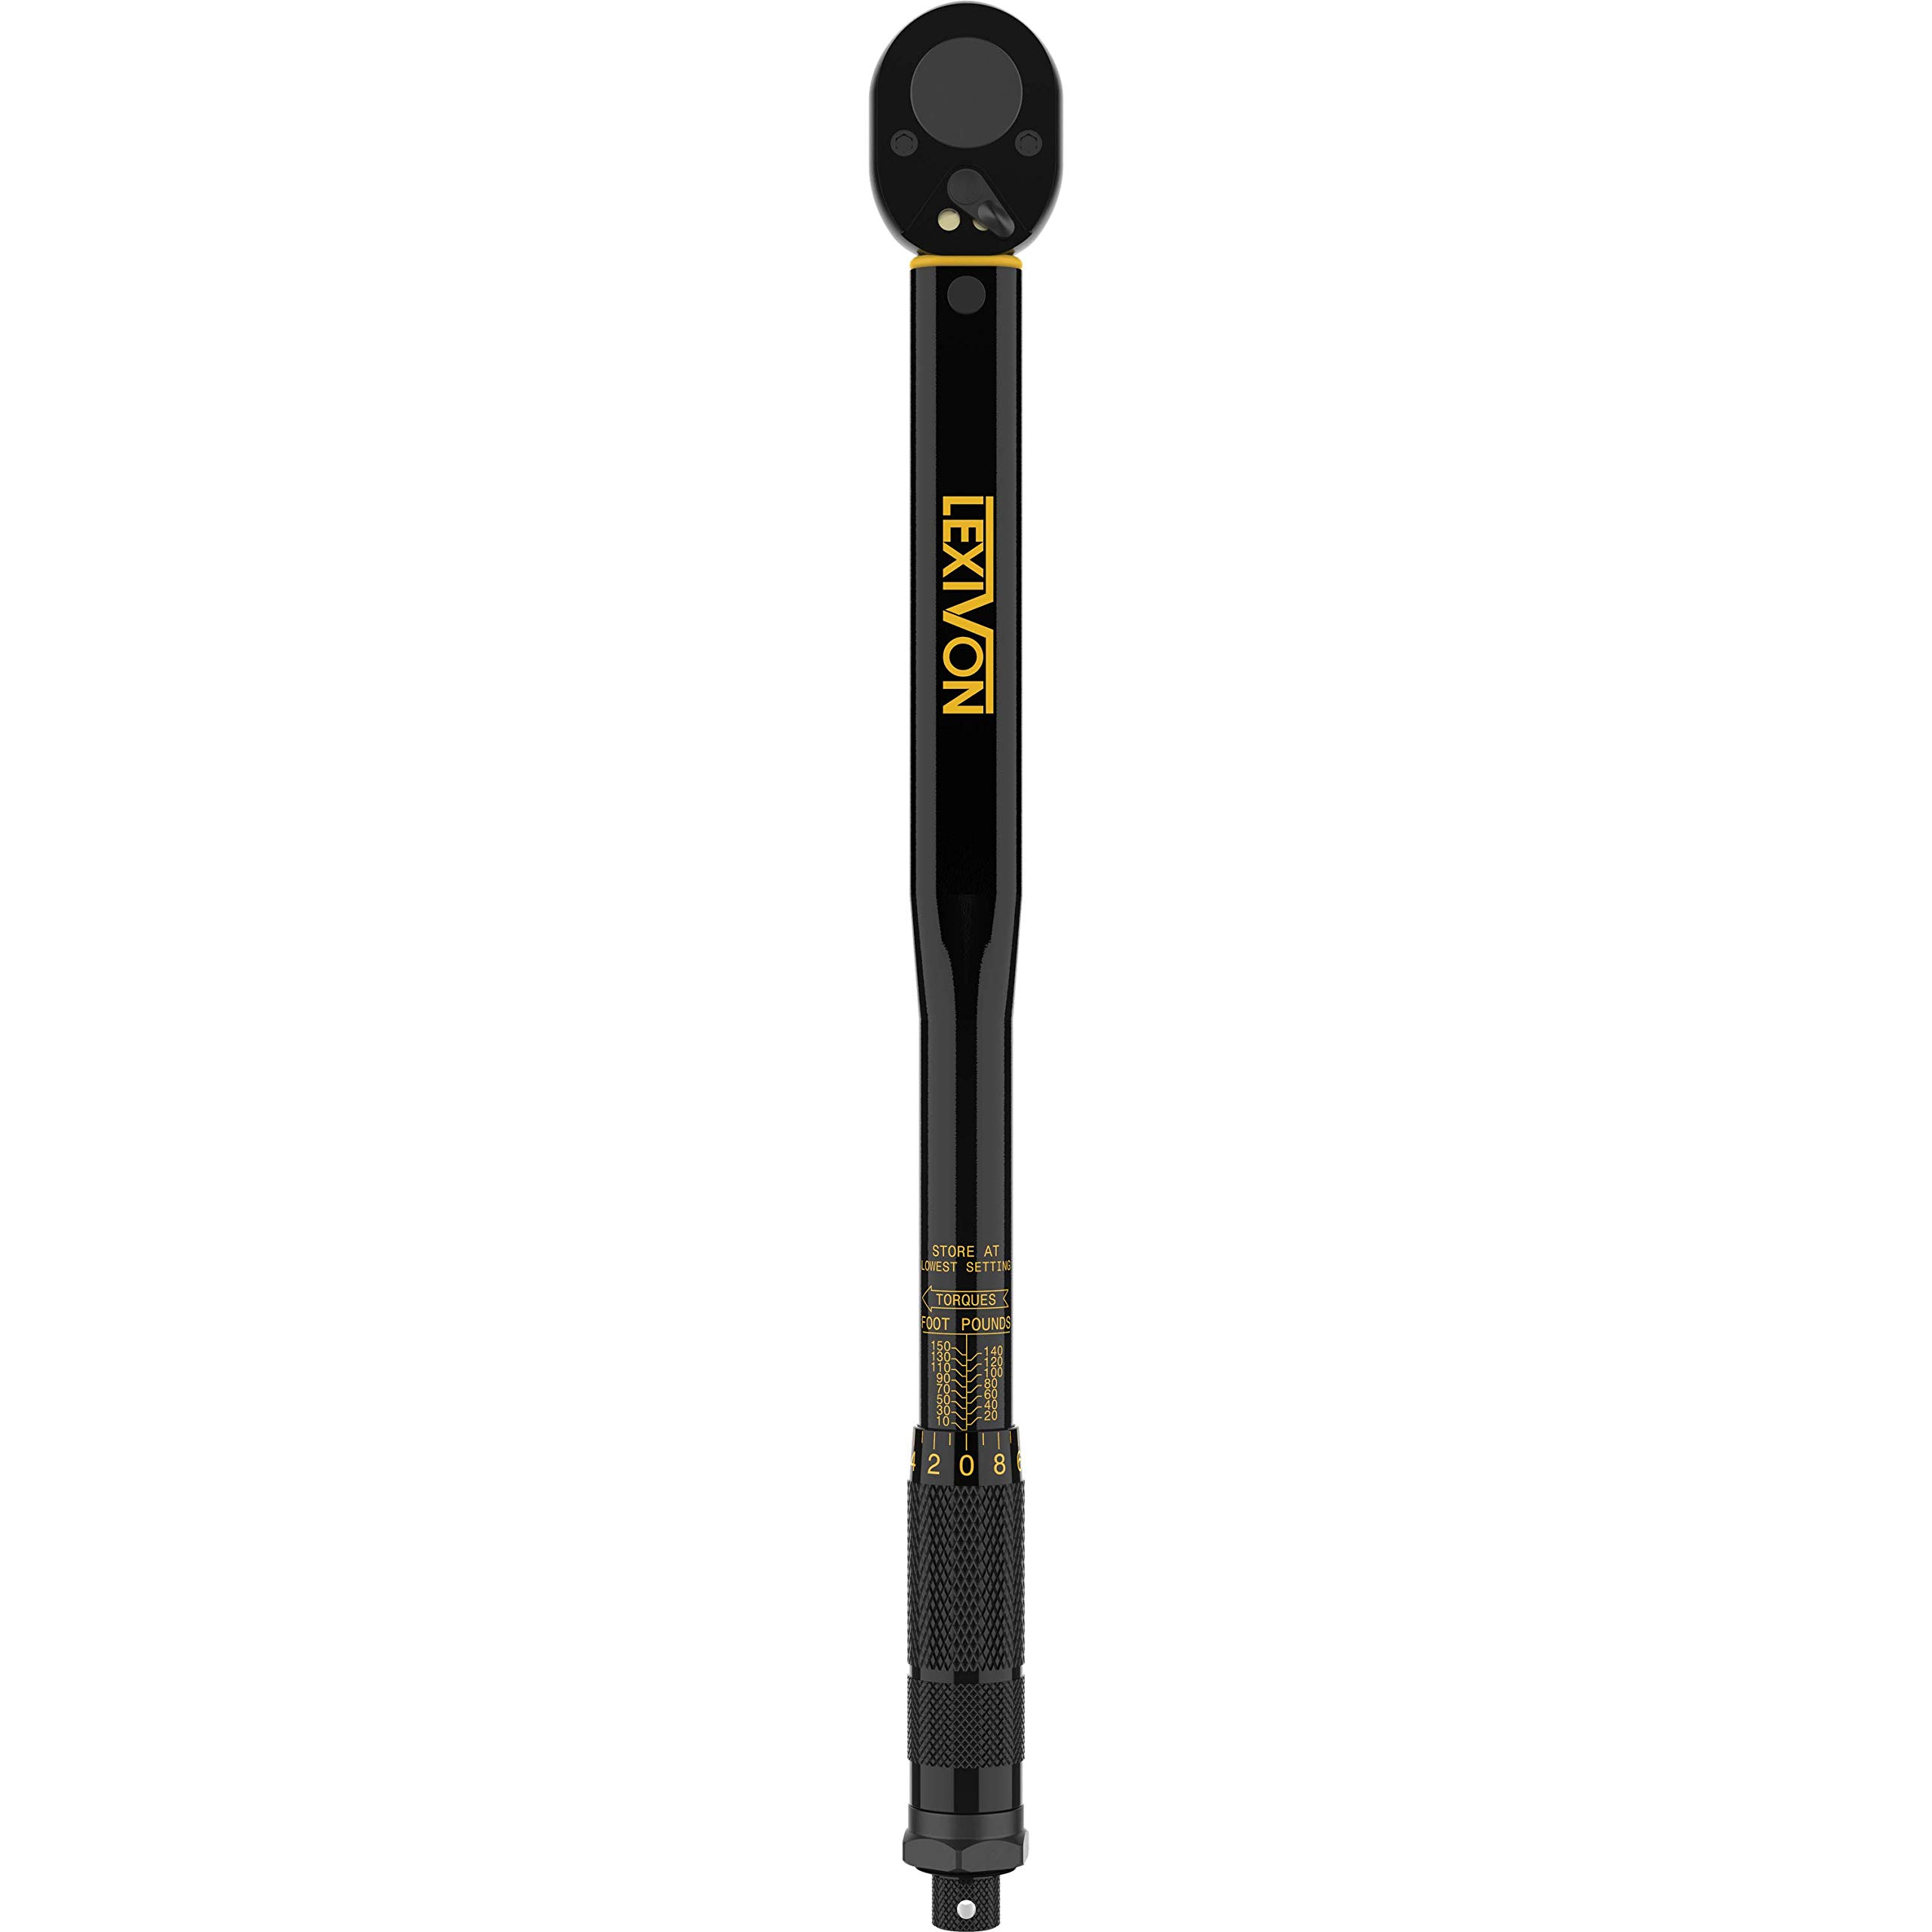 LEXIVON 1/2-Inch Drive Click Torque Wrench $35.97 at Amazon